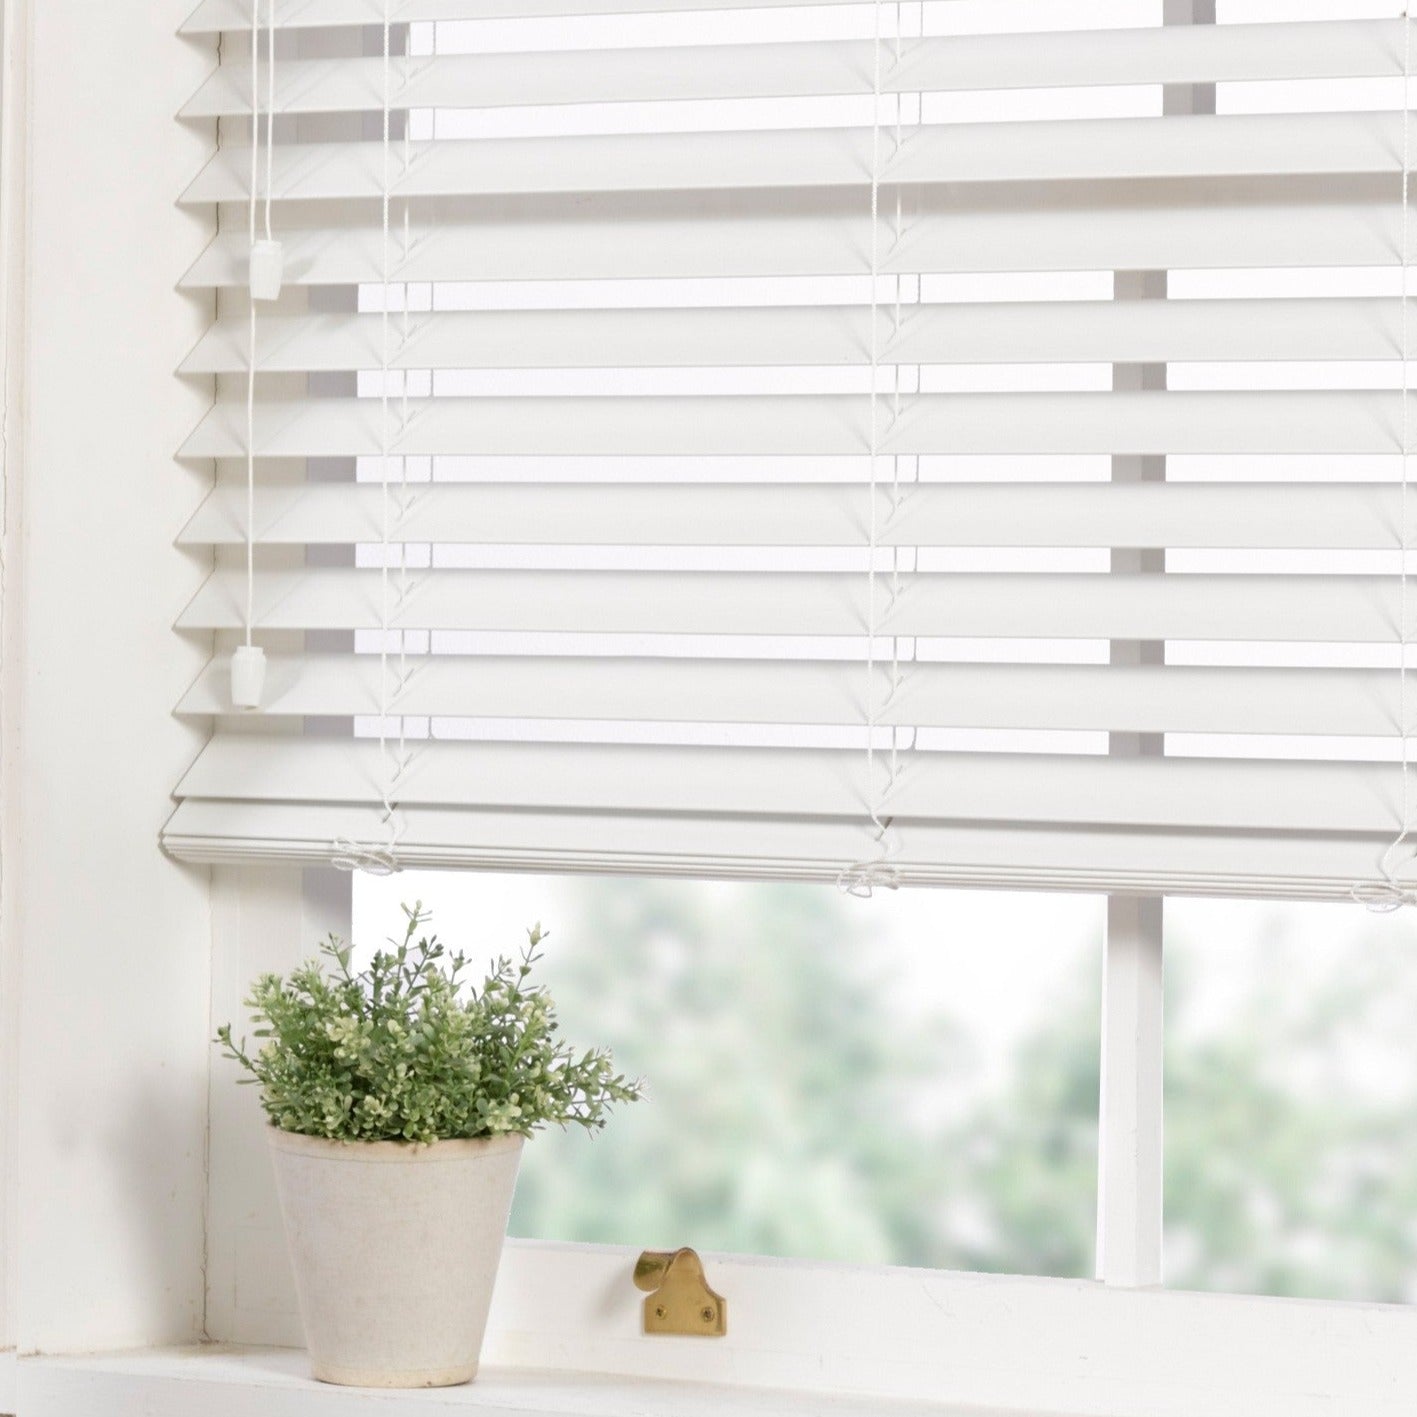 Timber look Venetian Blinds - also known as Faux Wood or Woodmates Blinds